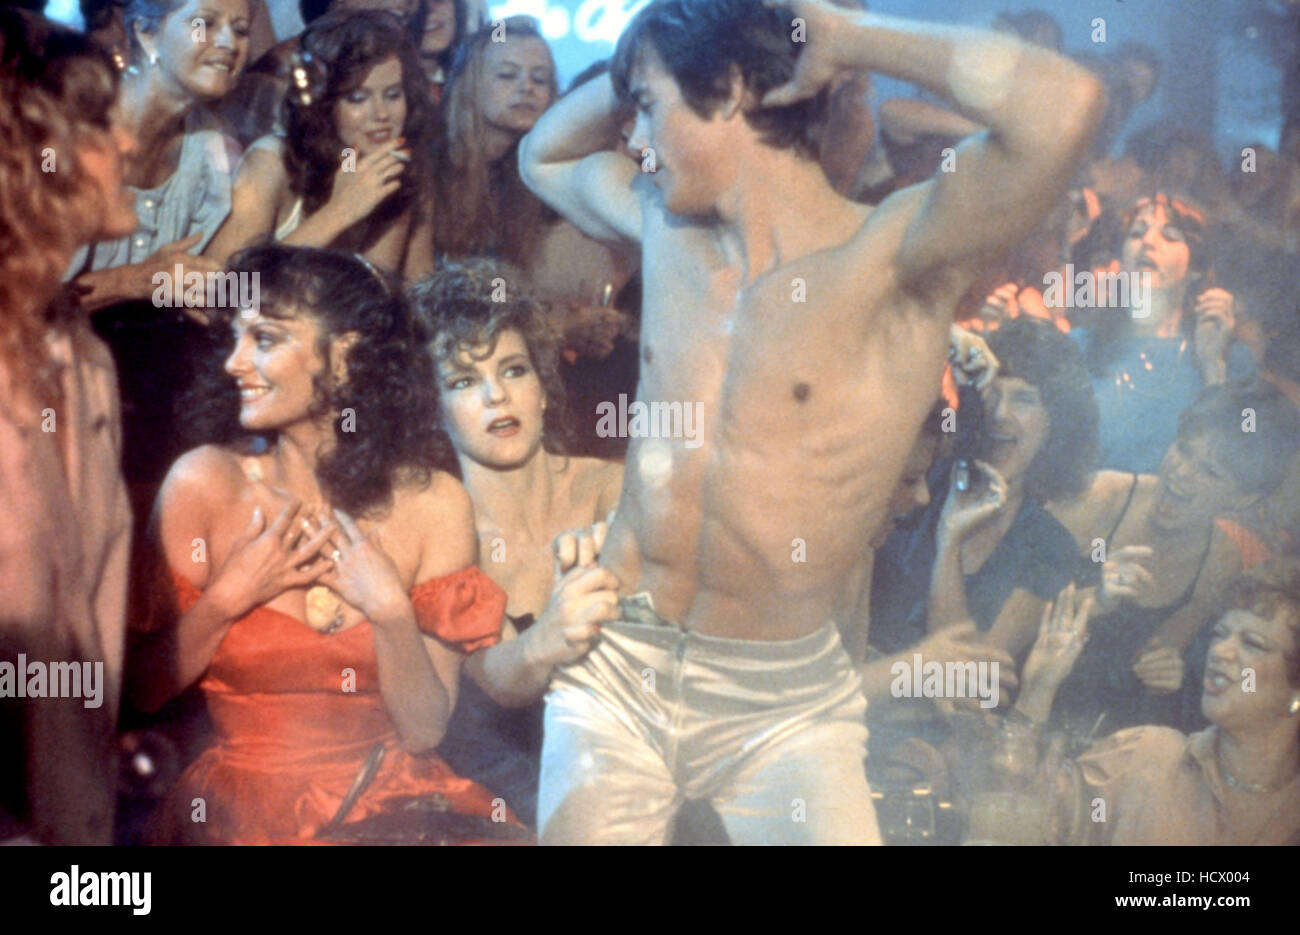 1980s movies, 1983 movies, atkins, barechested, christopher, dancing, delme...